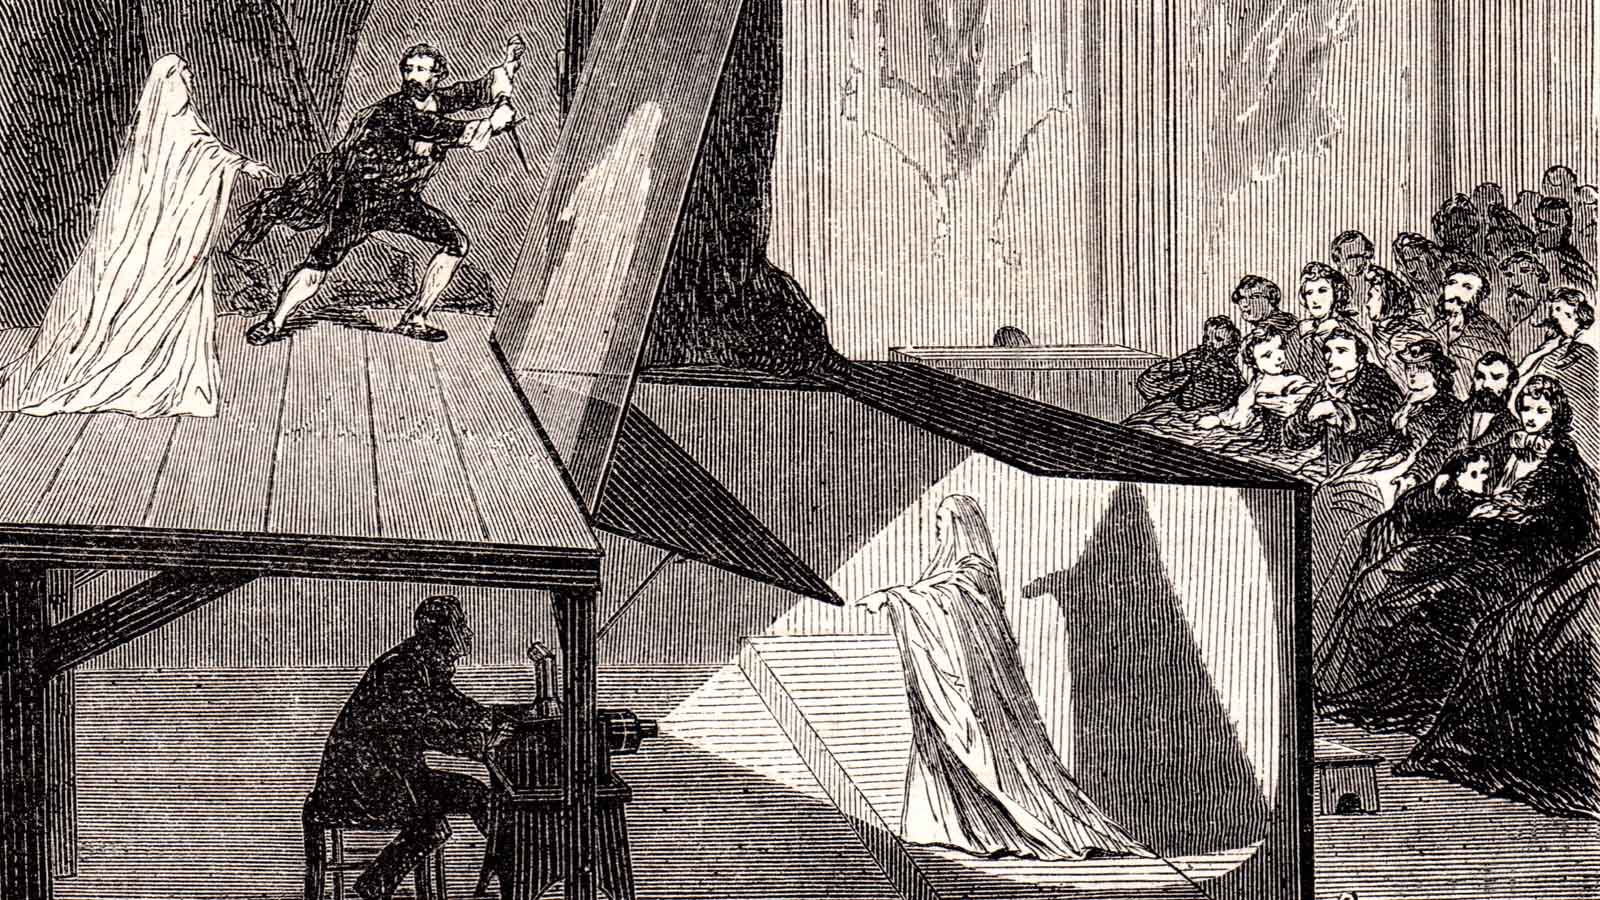 Lithograph illustration of Pepper's Ghost from Le Monde 1865